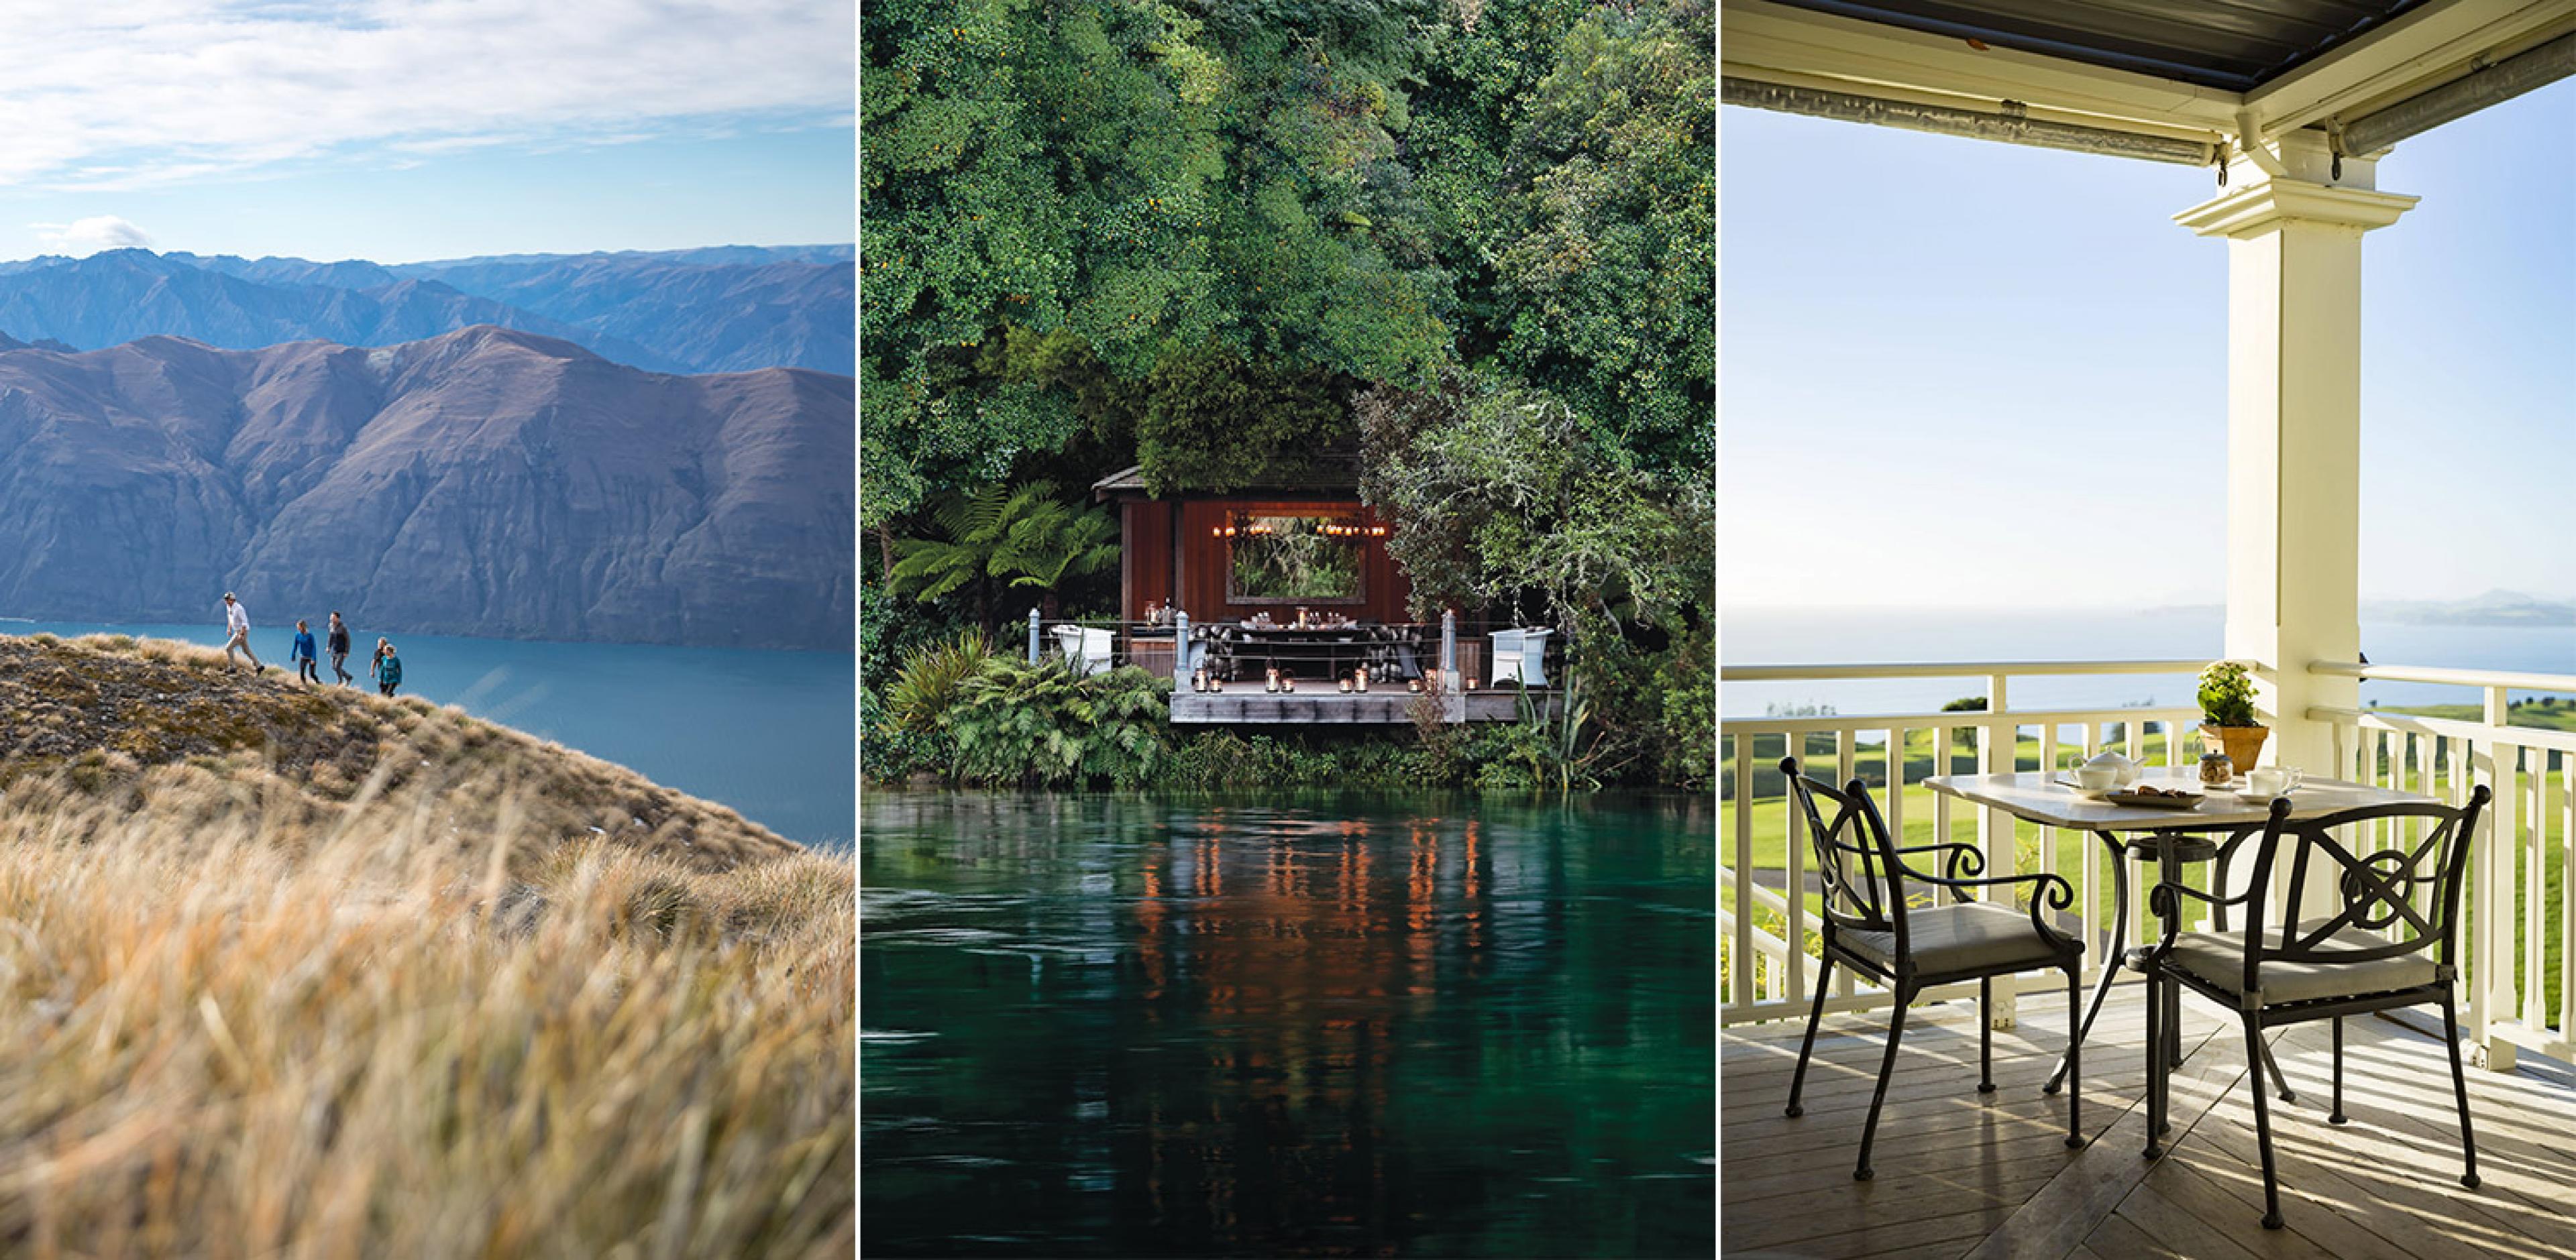 three scenes in new zealand. on left a family hiking a ridge; in the middle a view of a wooden building in the woods from across a narrow river; on the right a covered porch with a table and chairs looking over lawn to water